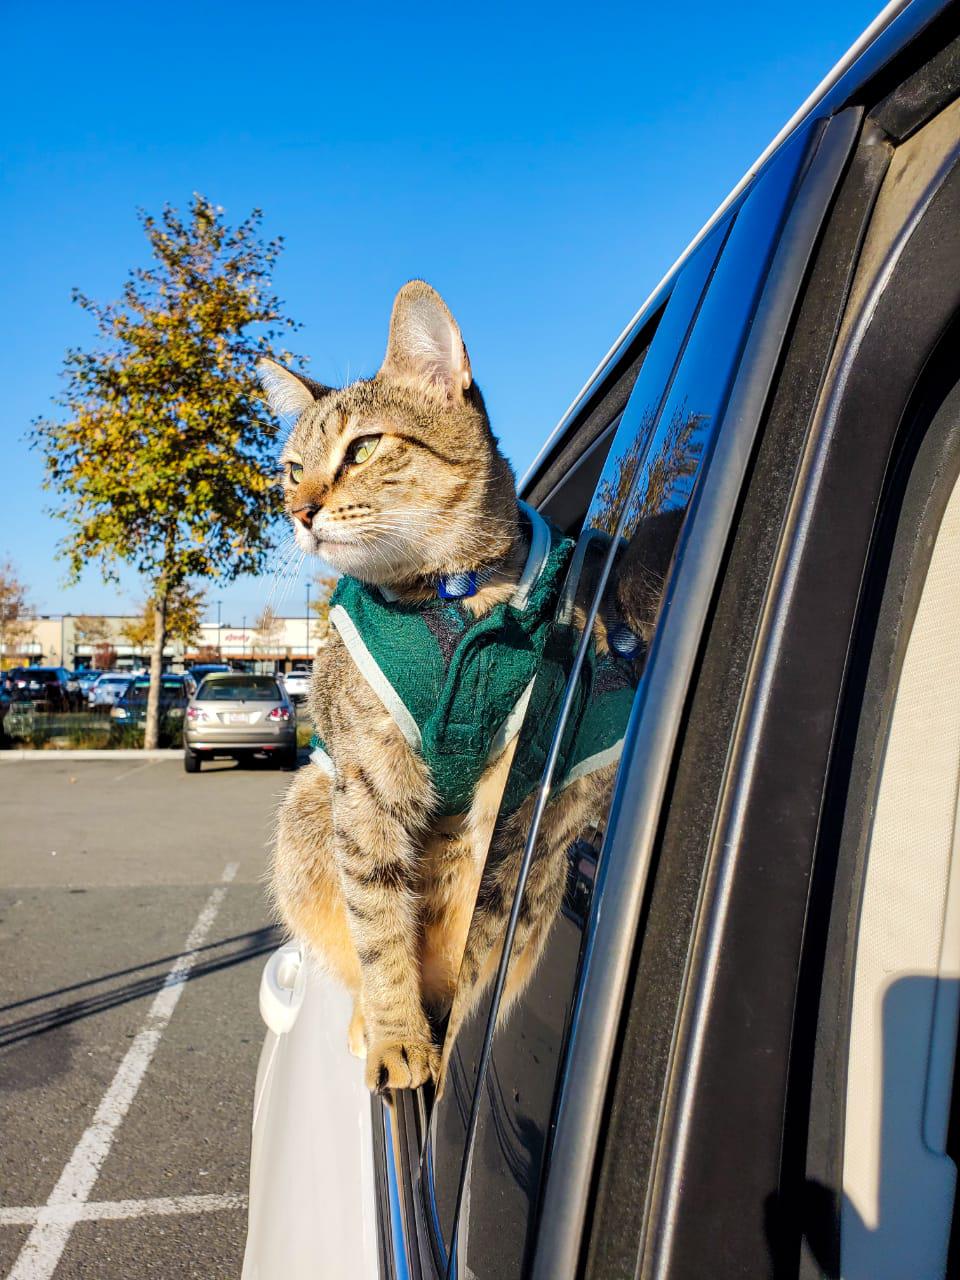 S.F. tourists search for beloved cat stolen in smash-and-grab car burglary